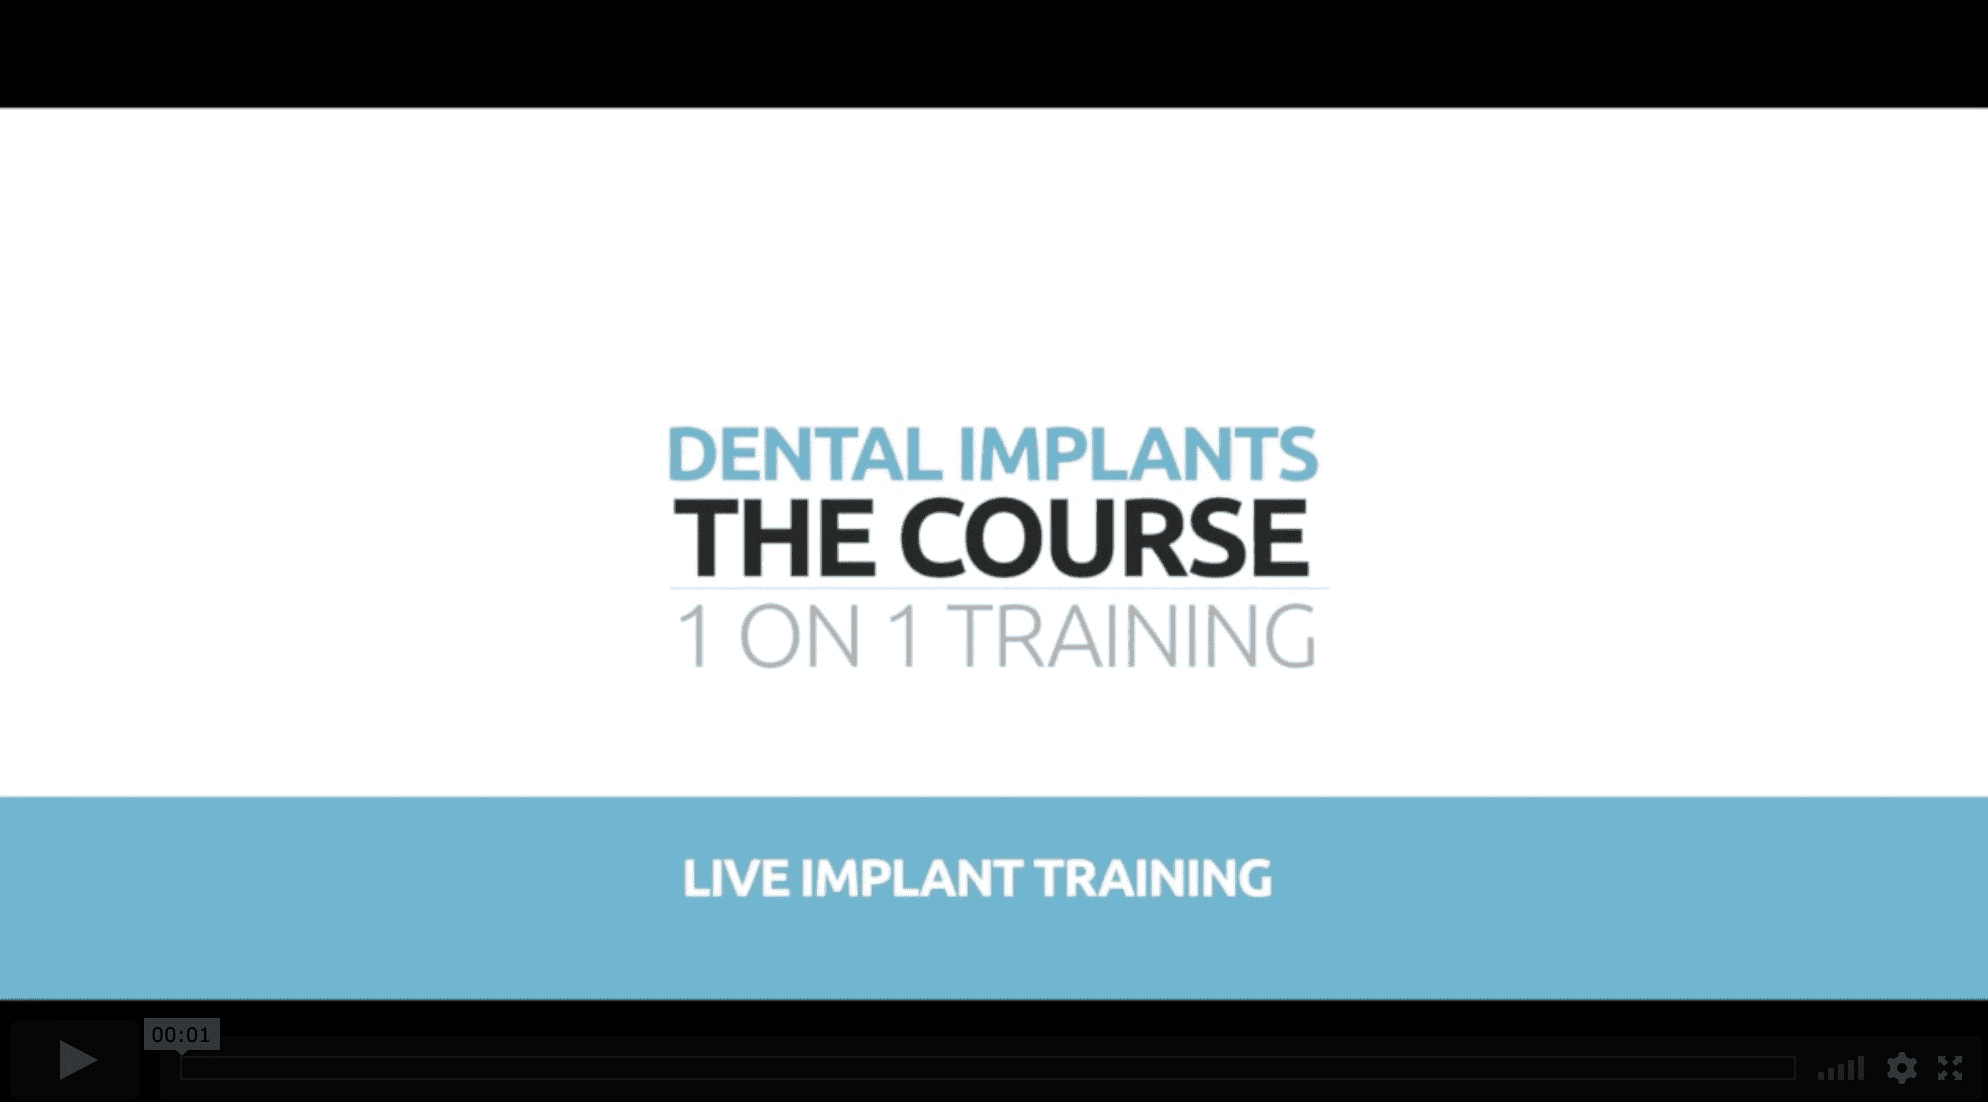 Basic Principles in Implant Surgery, Medical History and Inform Consent